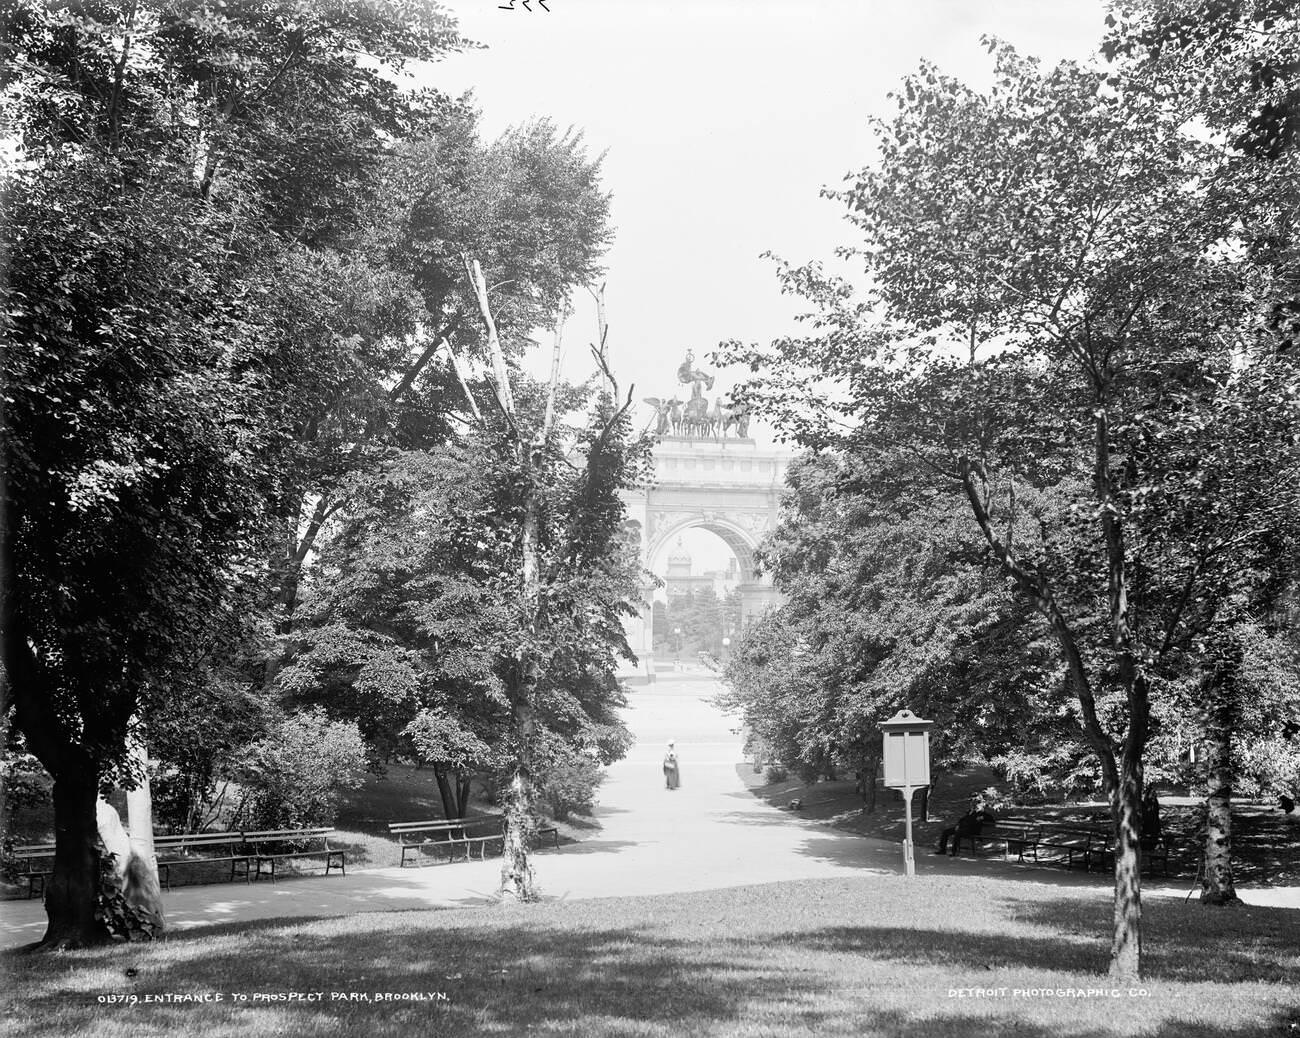 Entrance To Prospect Park With Memorial Arch, Brooklyn, 1900